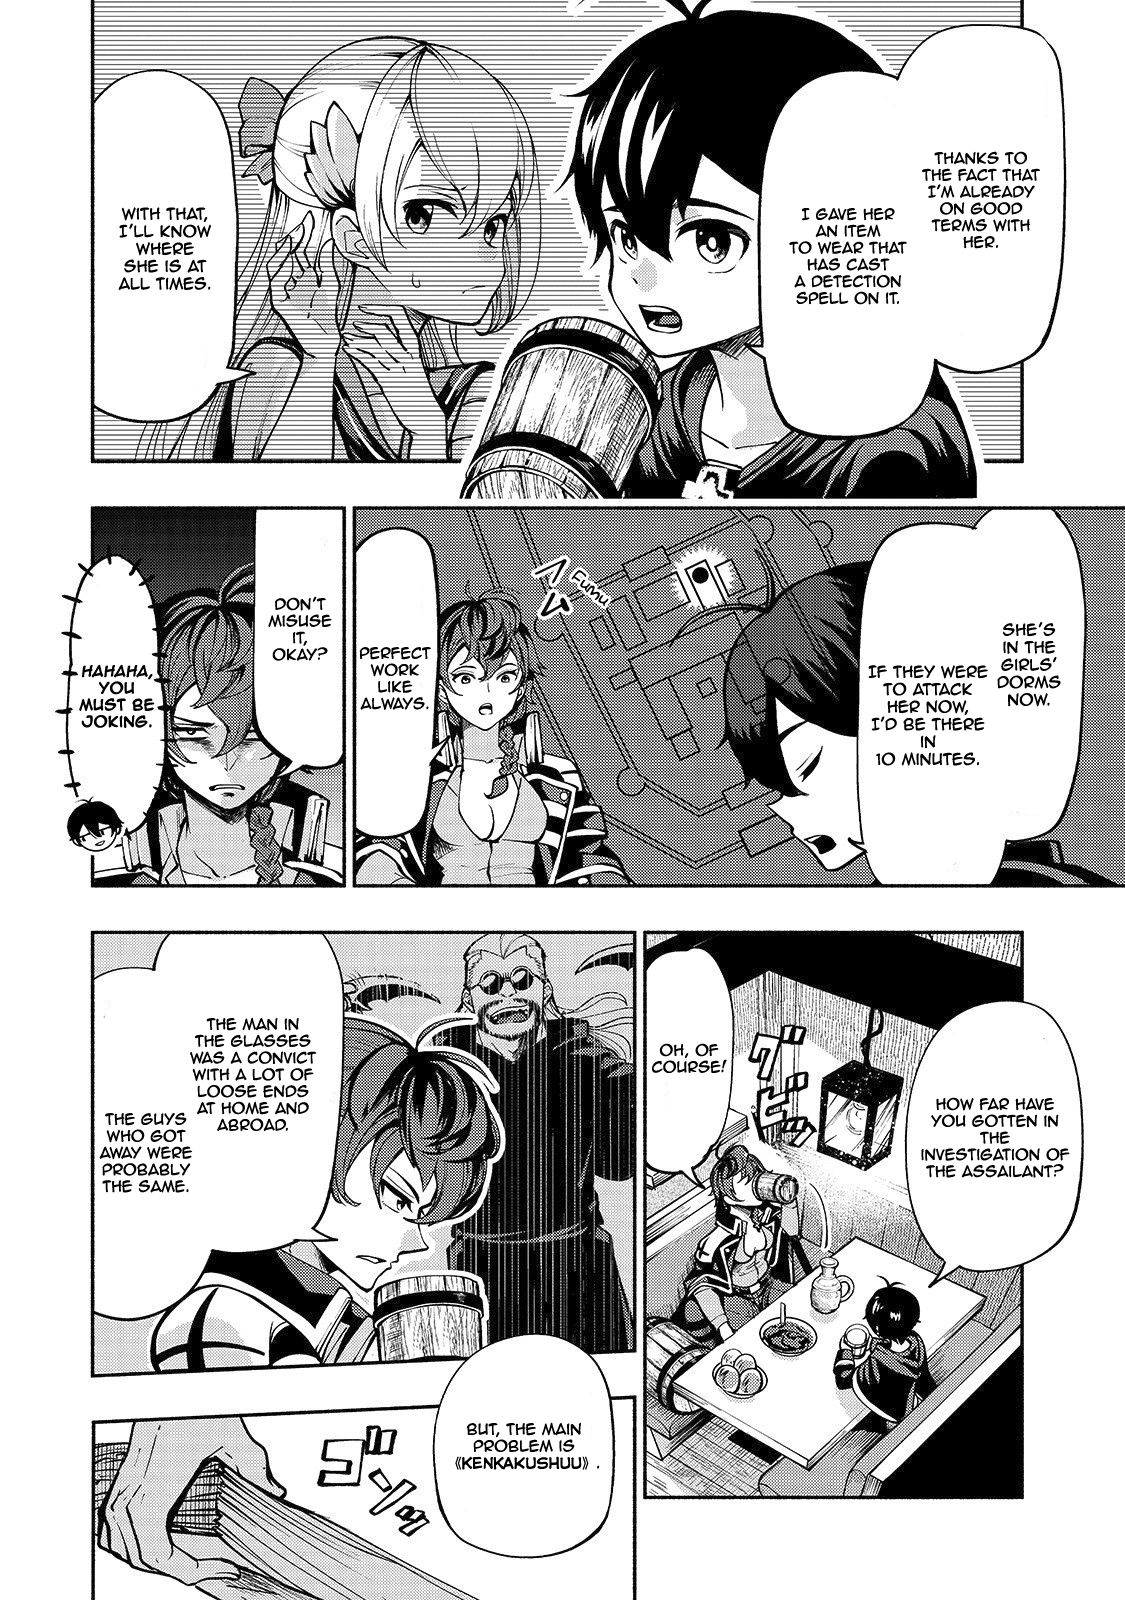 The Reincarnated 「Sword Saint」 Wants To Take It Easy - chapter 4 - #4